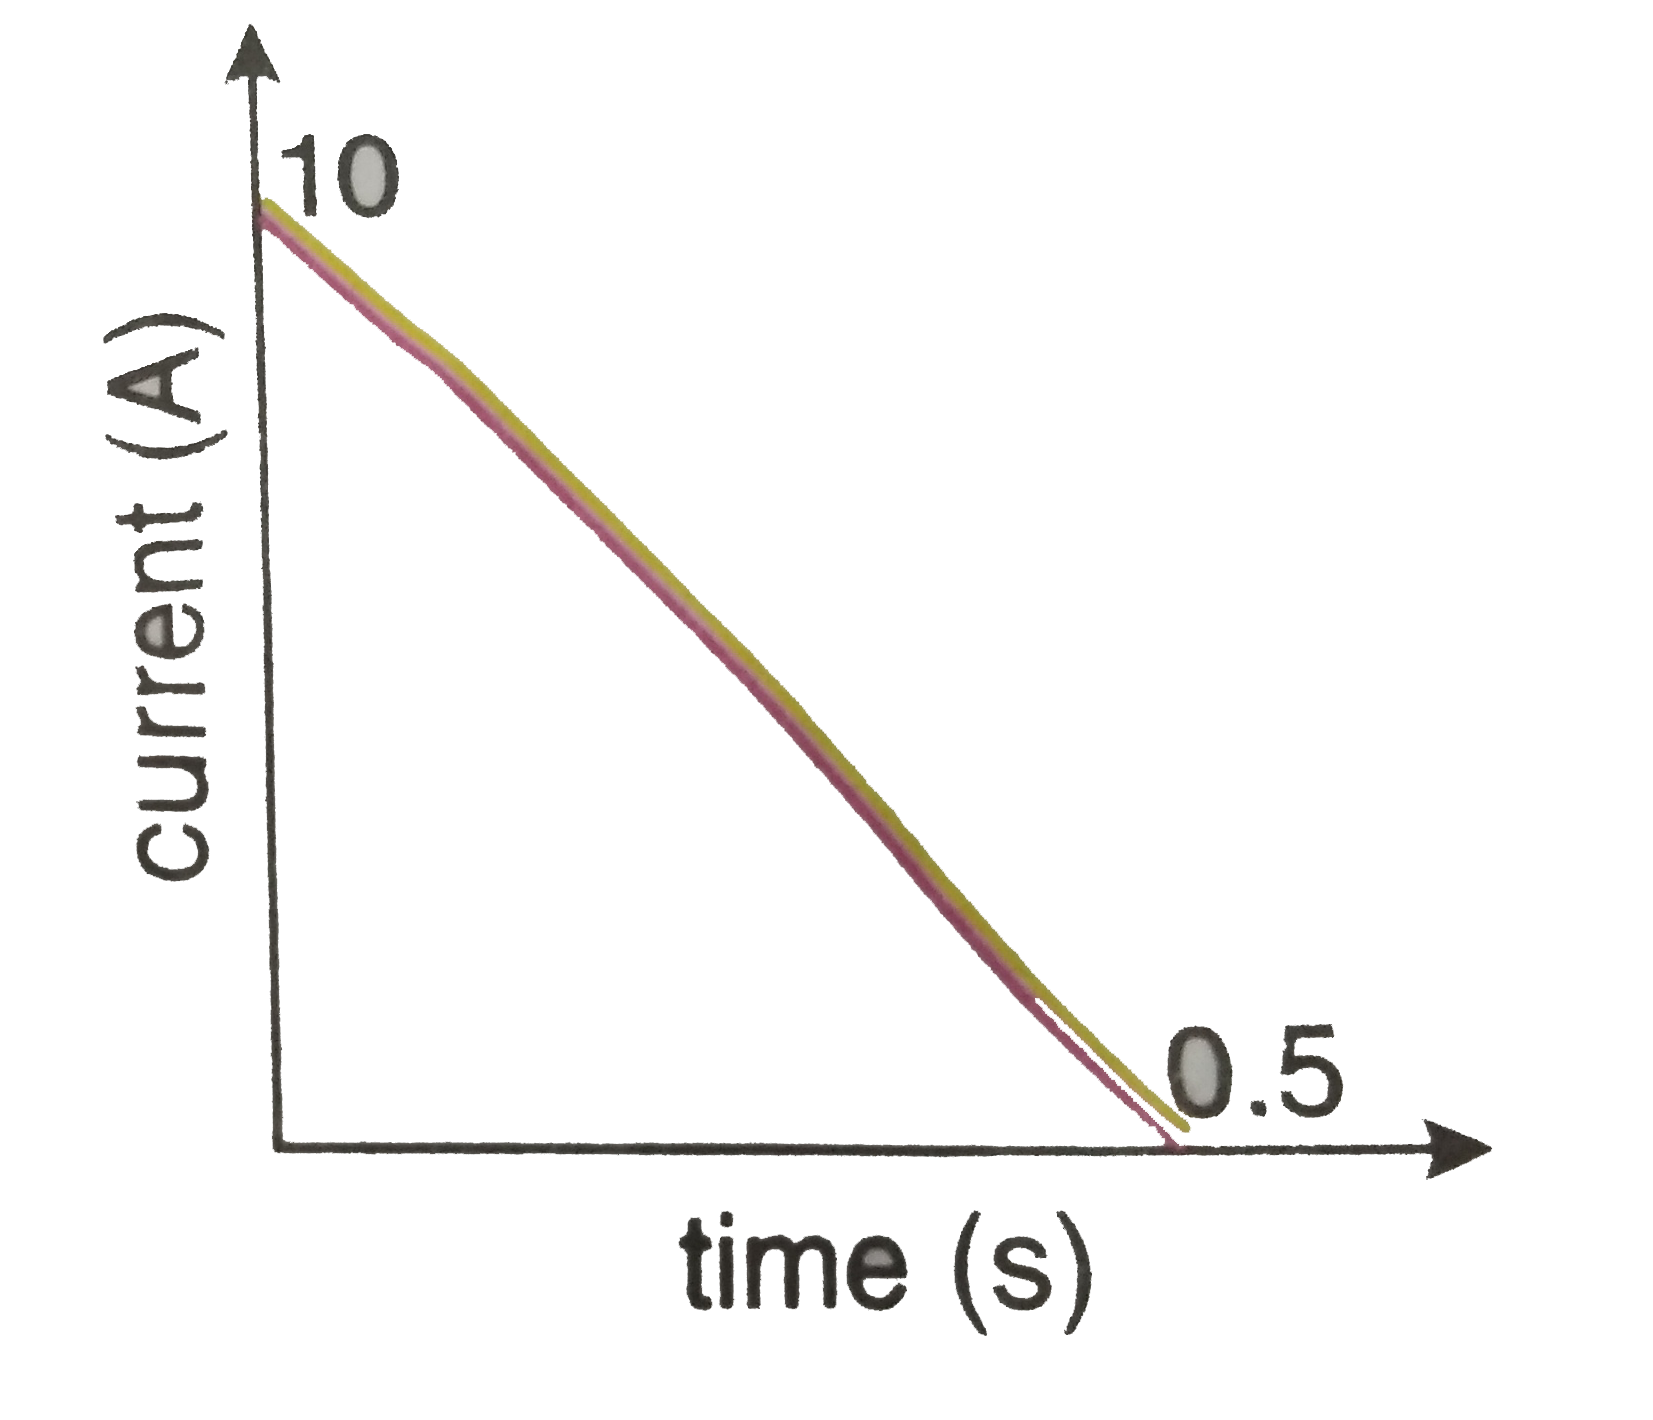 In a coil of resistance 100Omega, a current is induced by changing the magentic flux through it as shown in the figure. The magnitude of change in flux through the coil is